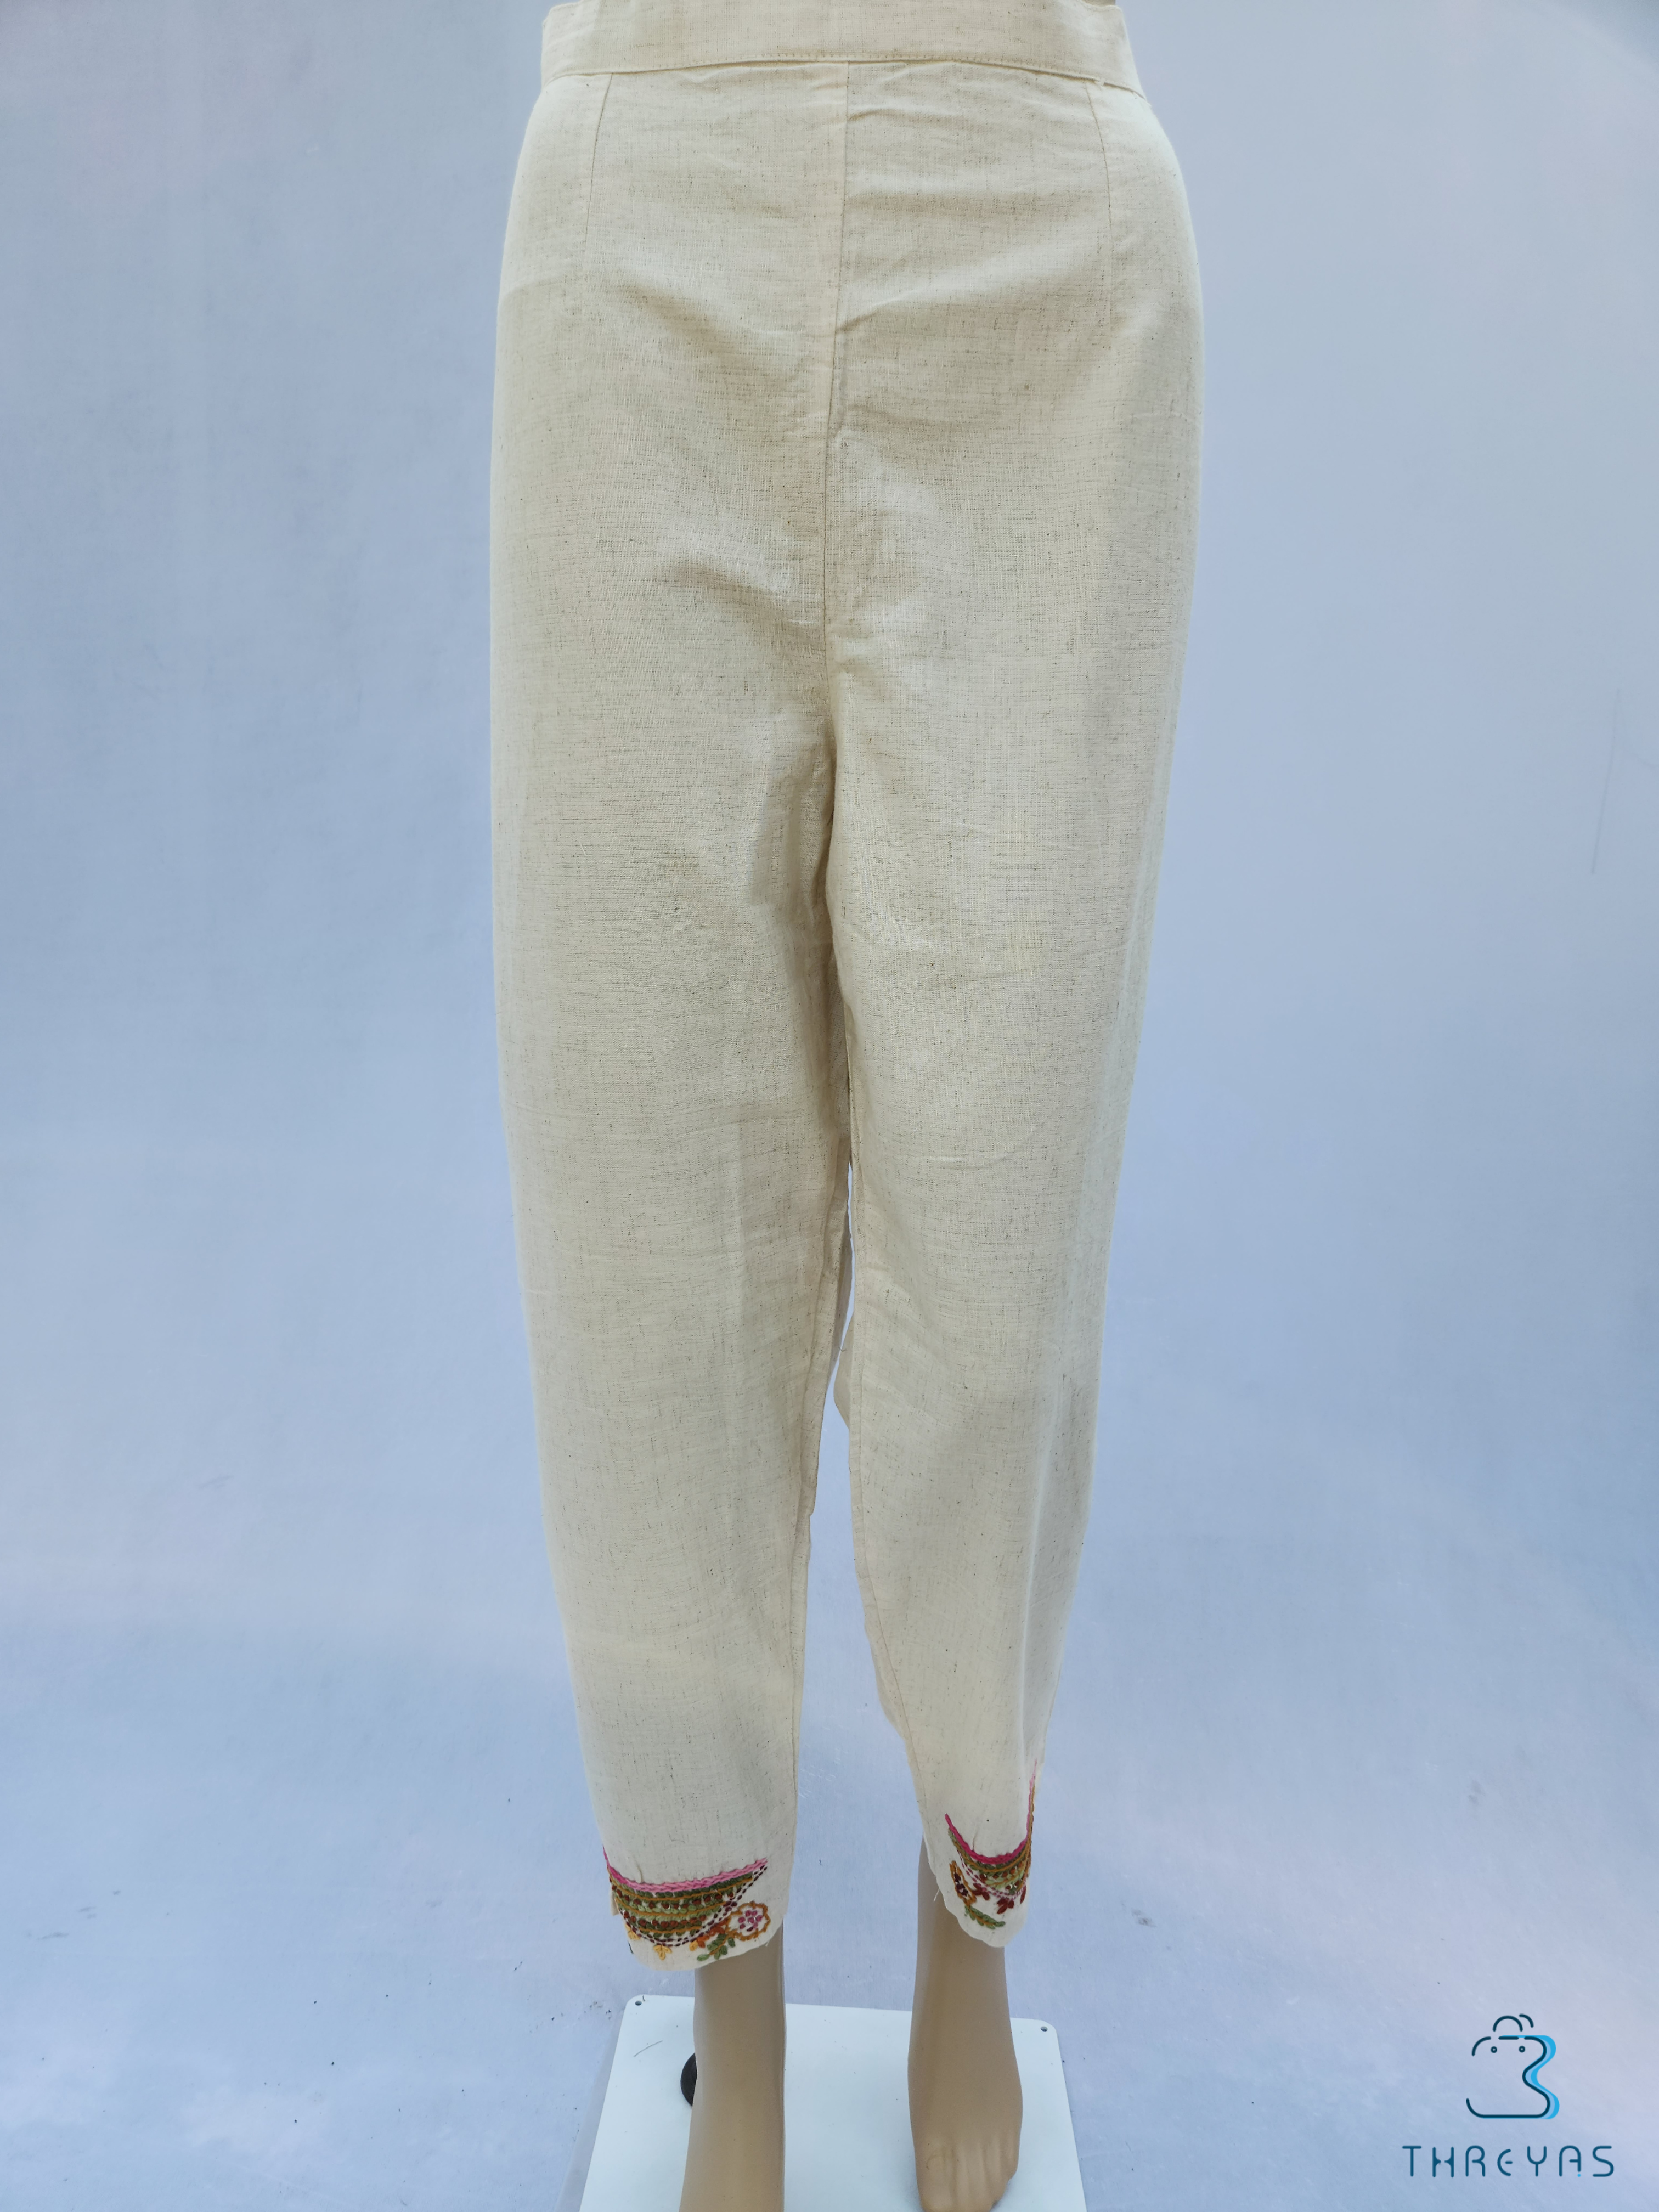 Medieval Viking Pants - Grey Cotton Trousers with Braiding | From £85.00